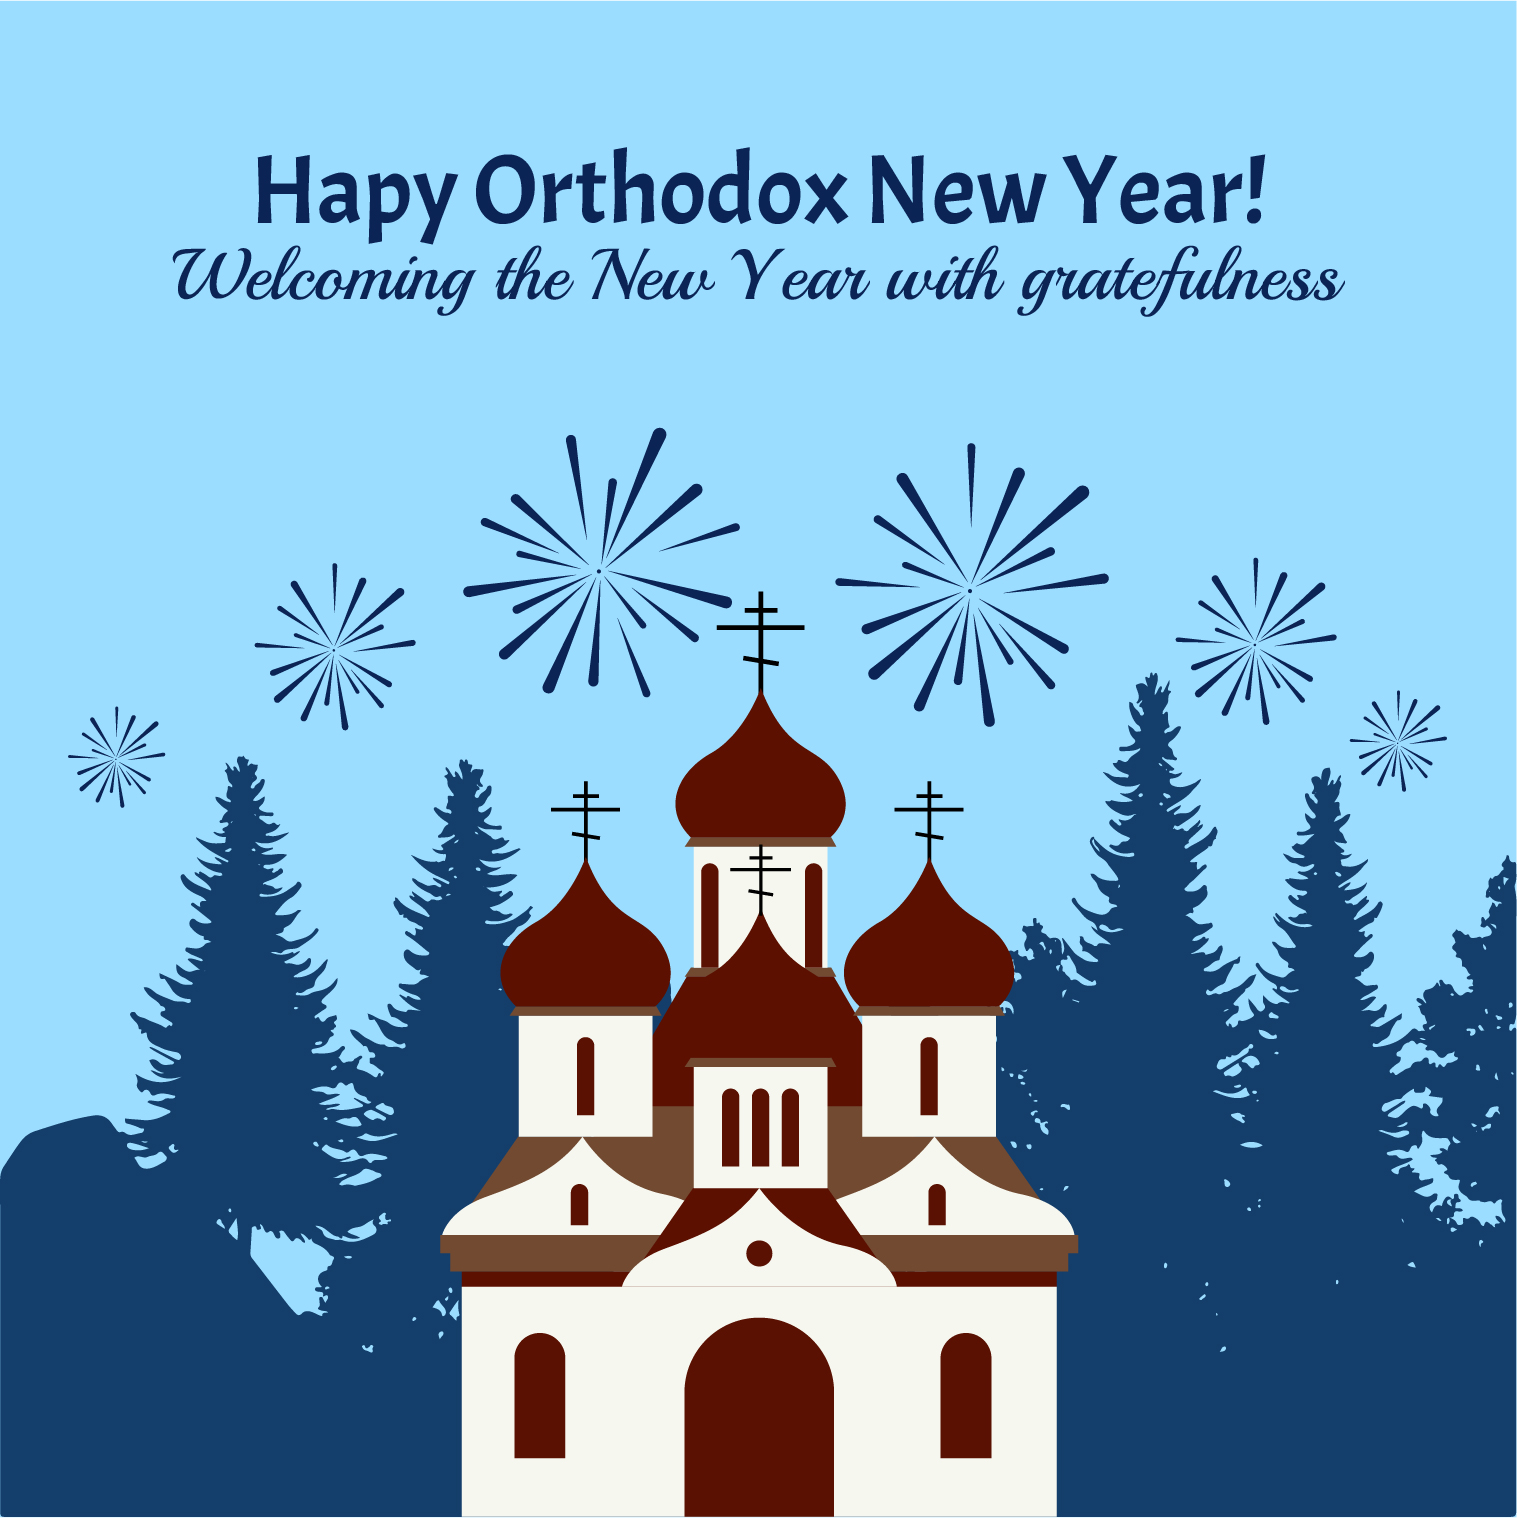 Orthodox New Year Poster Vector in Illustrator, PSD, EPS, SVG, JPG, PNG